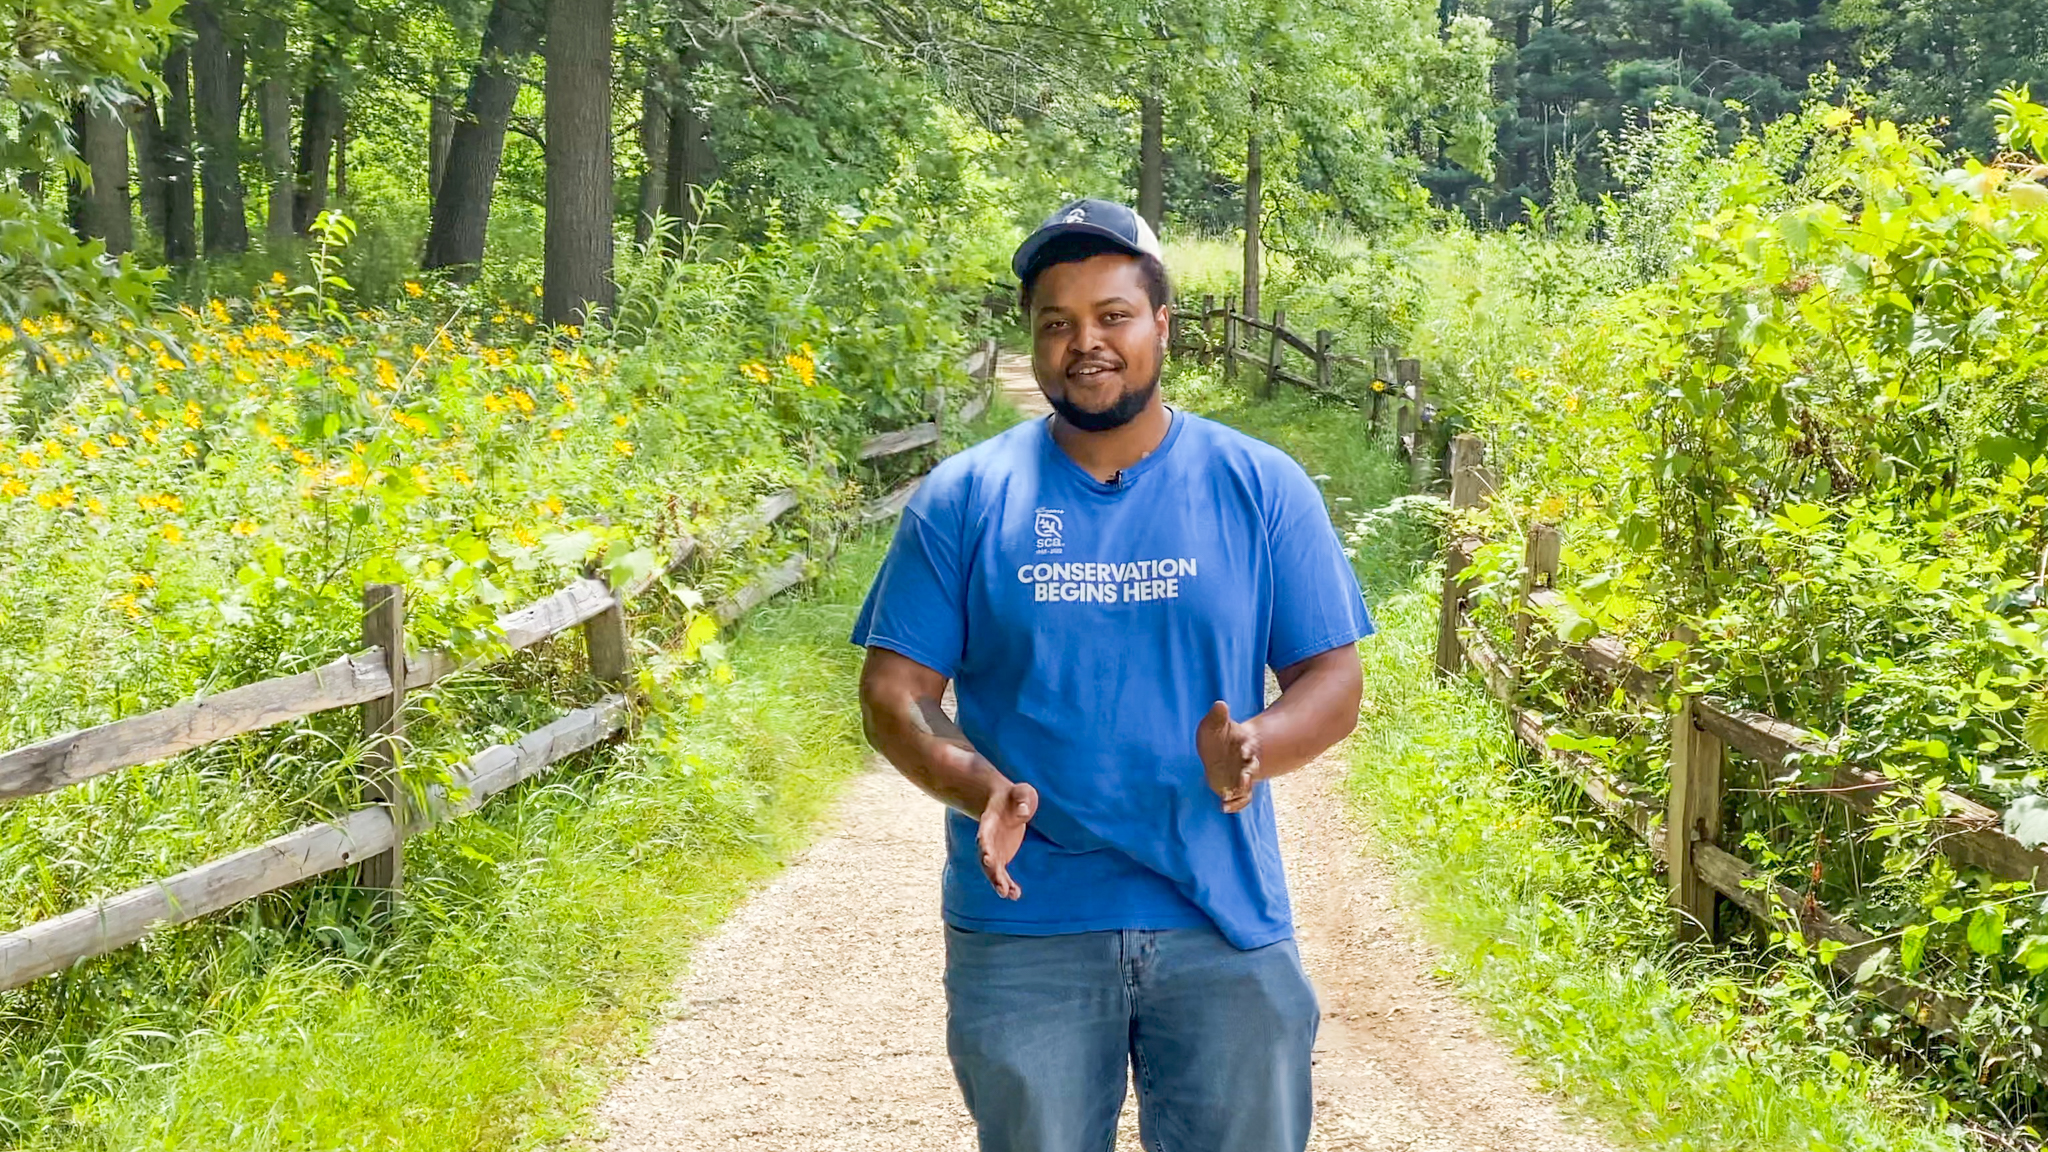 Young man in a blue shirt standing on a path surrounded by green forest preserves